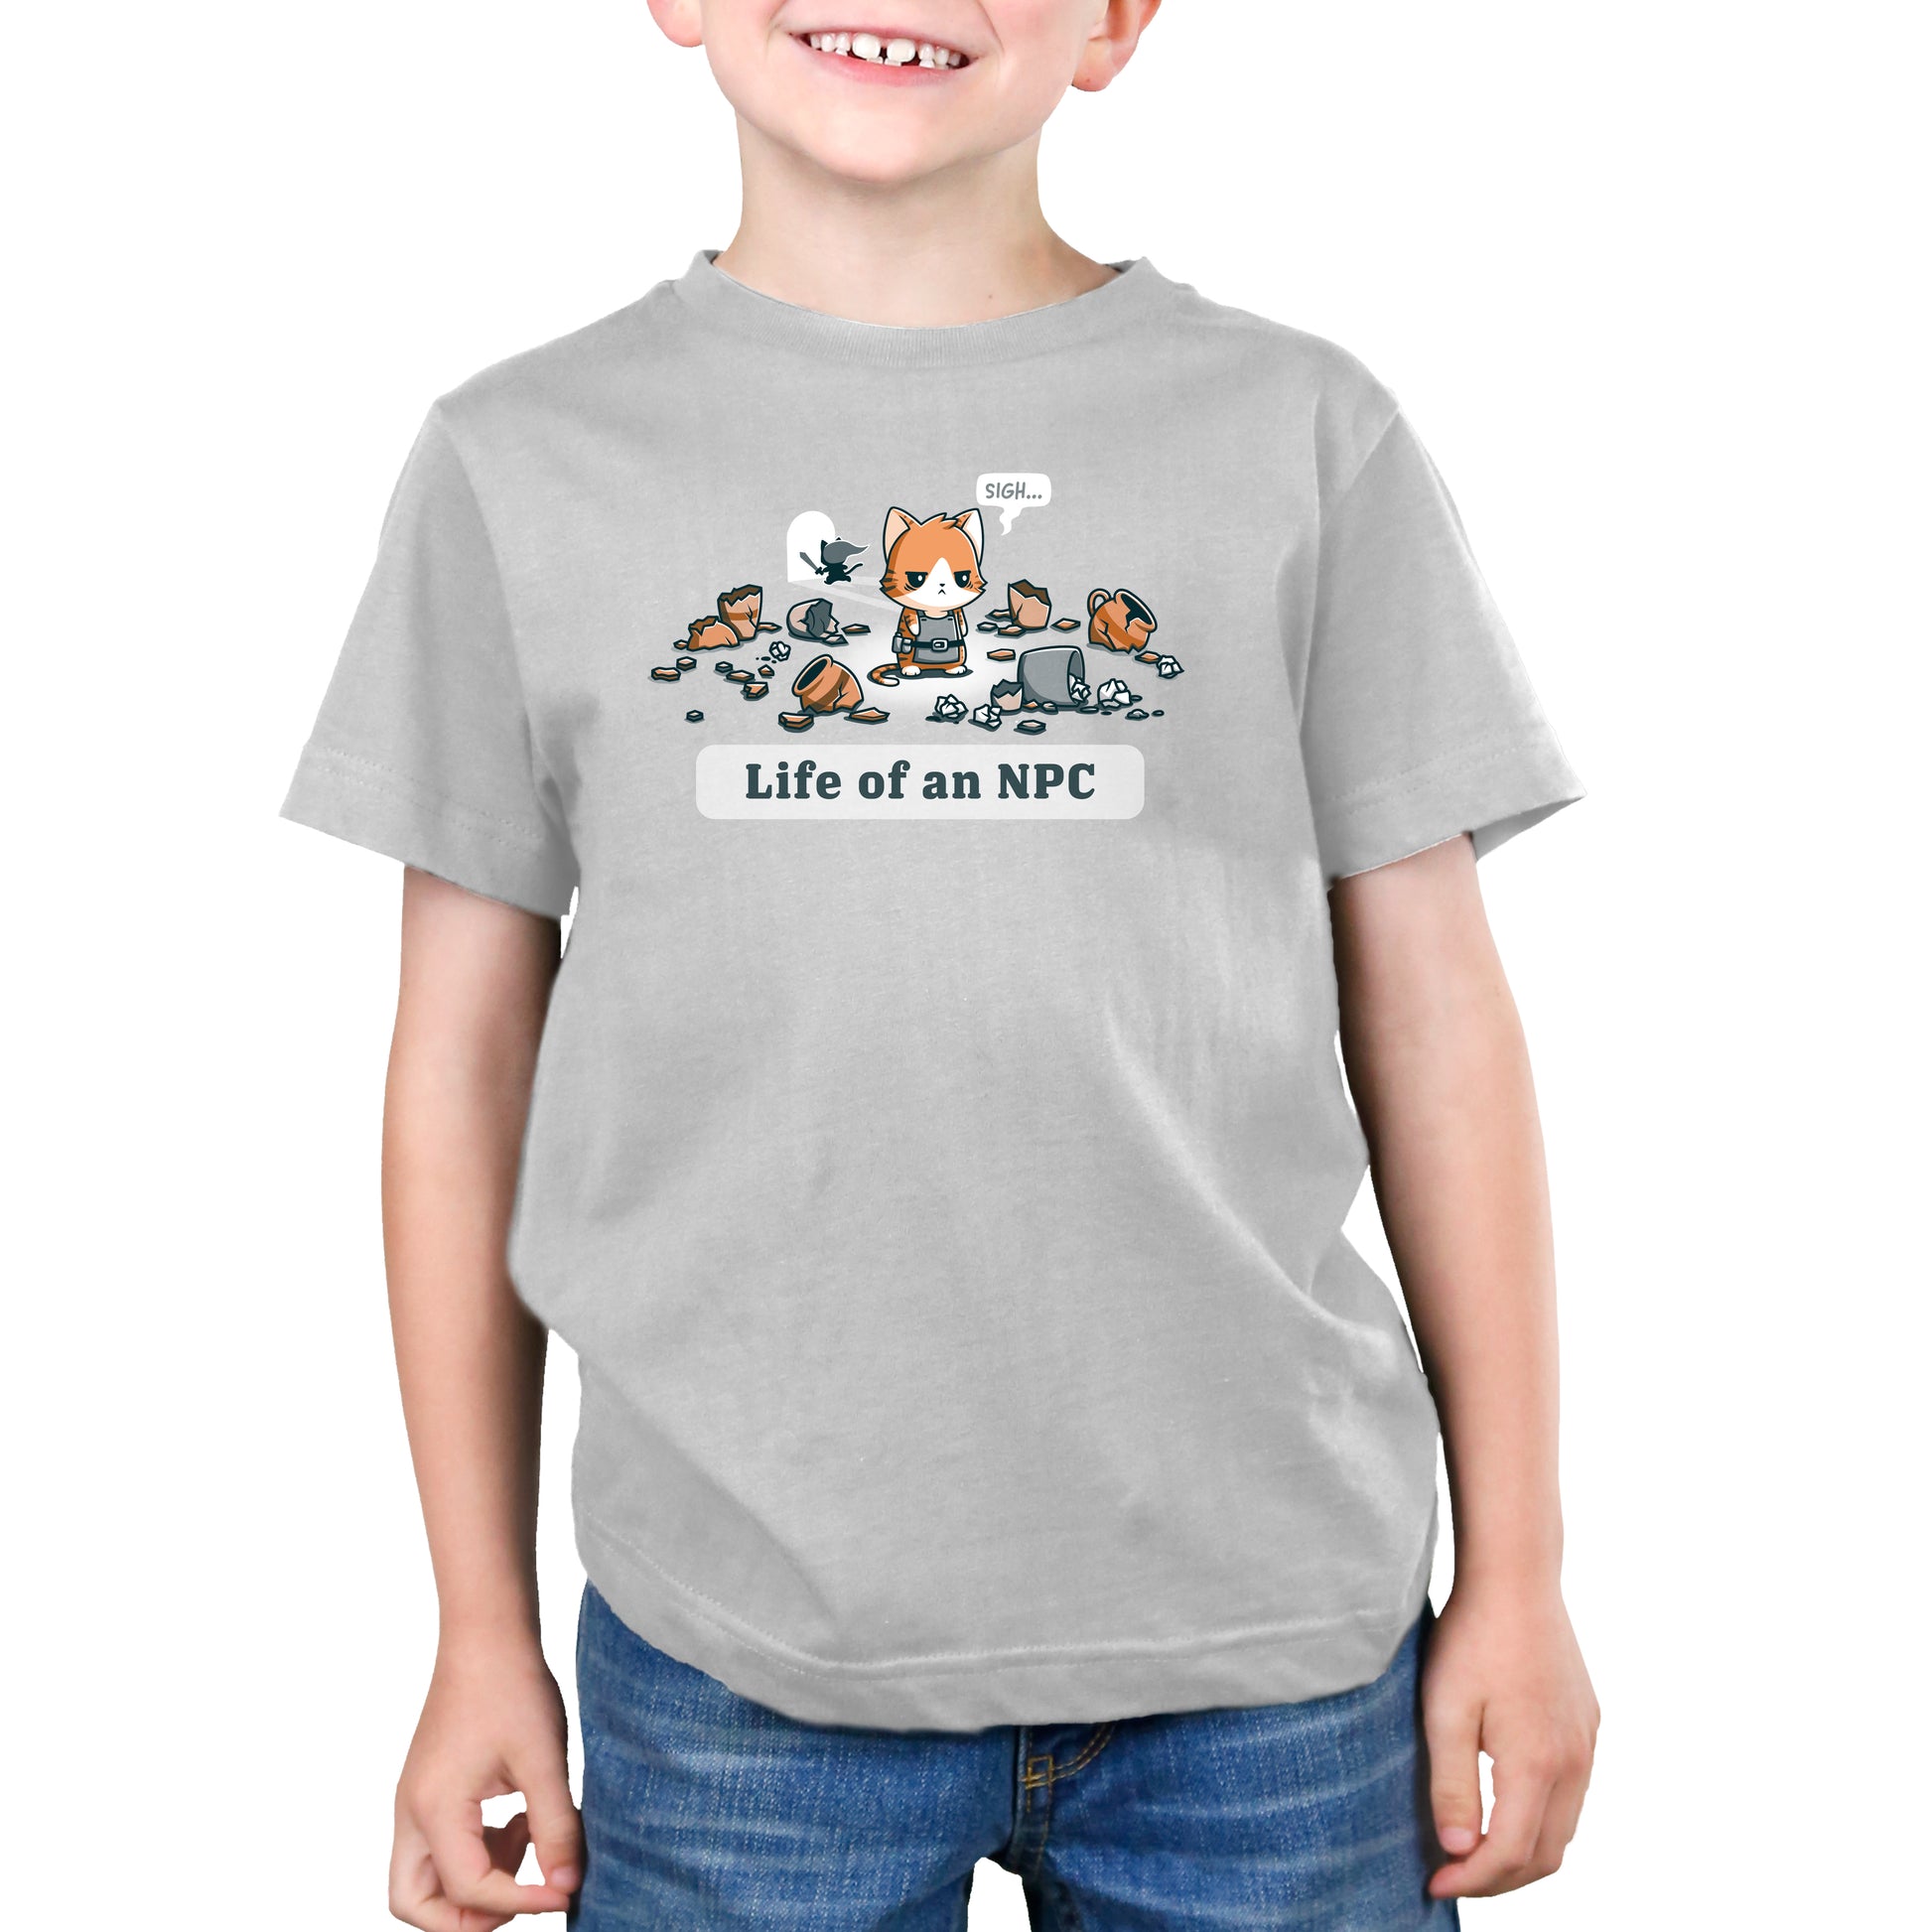 A child wearing a monsterdigital "Life Of An NPC" super soft ringspun cotton silver t-shirt with an illustration of a cat sitting among items, saying "Sigh," and the text "Life of an NPC" below the image.